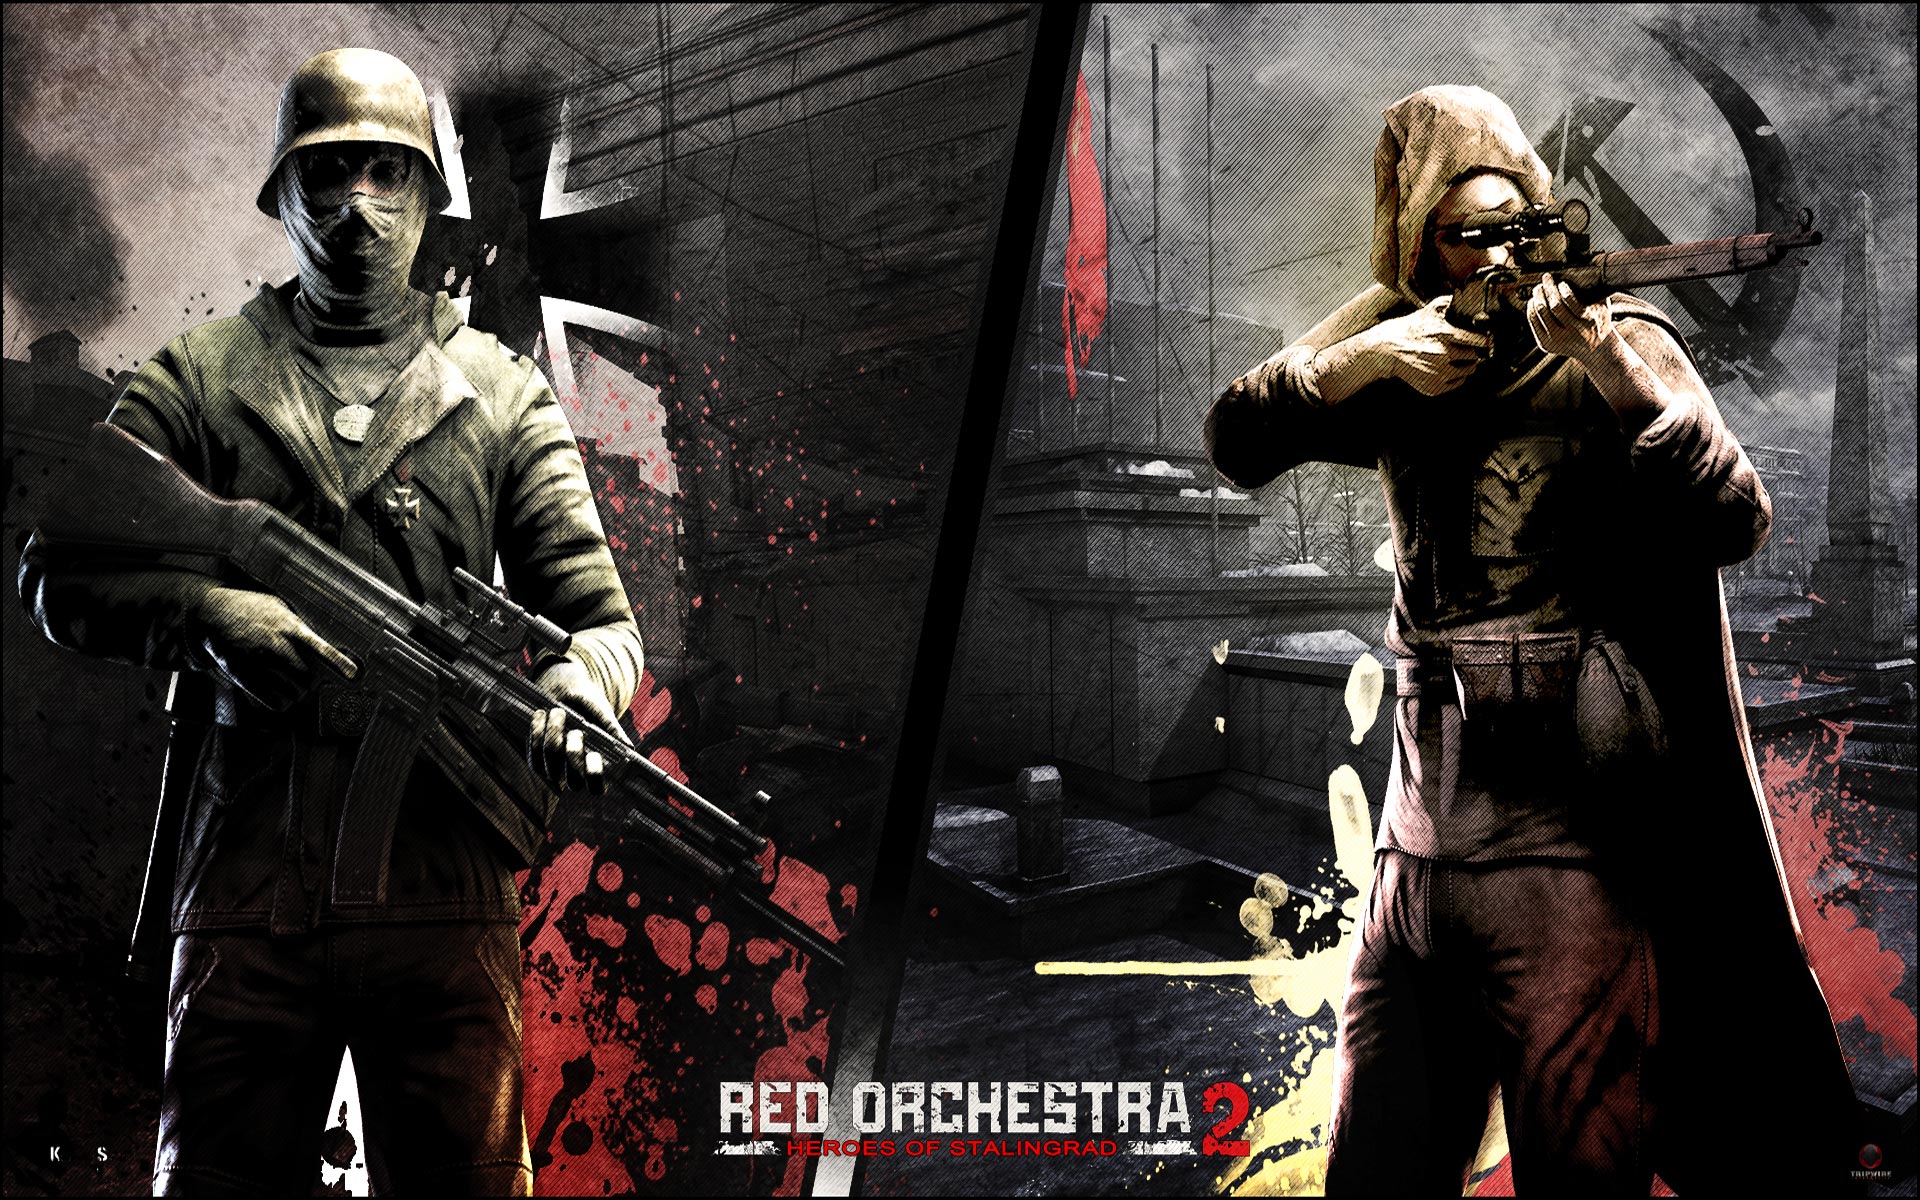 Игра red orchestra 2. Red Orchestra 2: Heroes of Stalingrad. Red Orchestra 2 Rising Storm. Игра ред оркестра 2 герои Сталинграда. Сталинград в Red Orchestra.